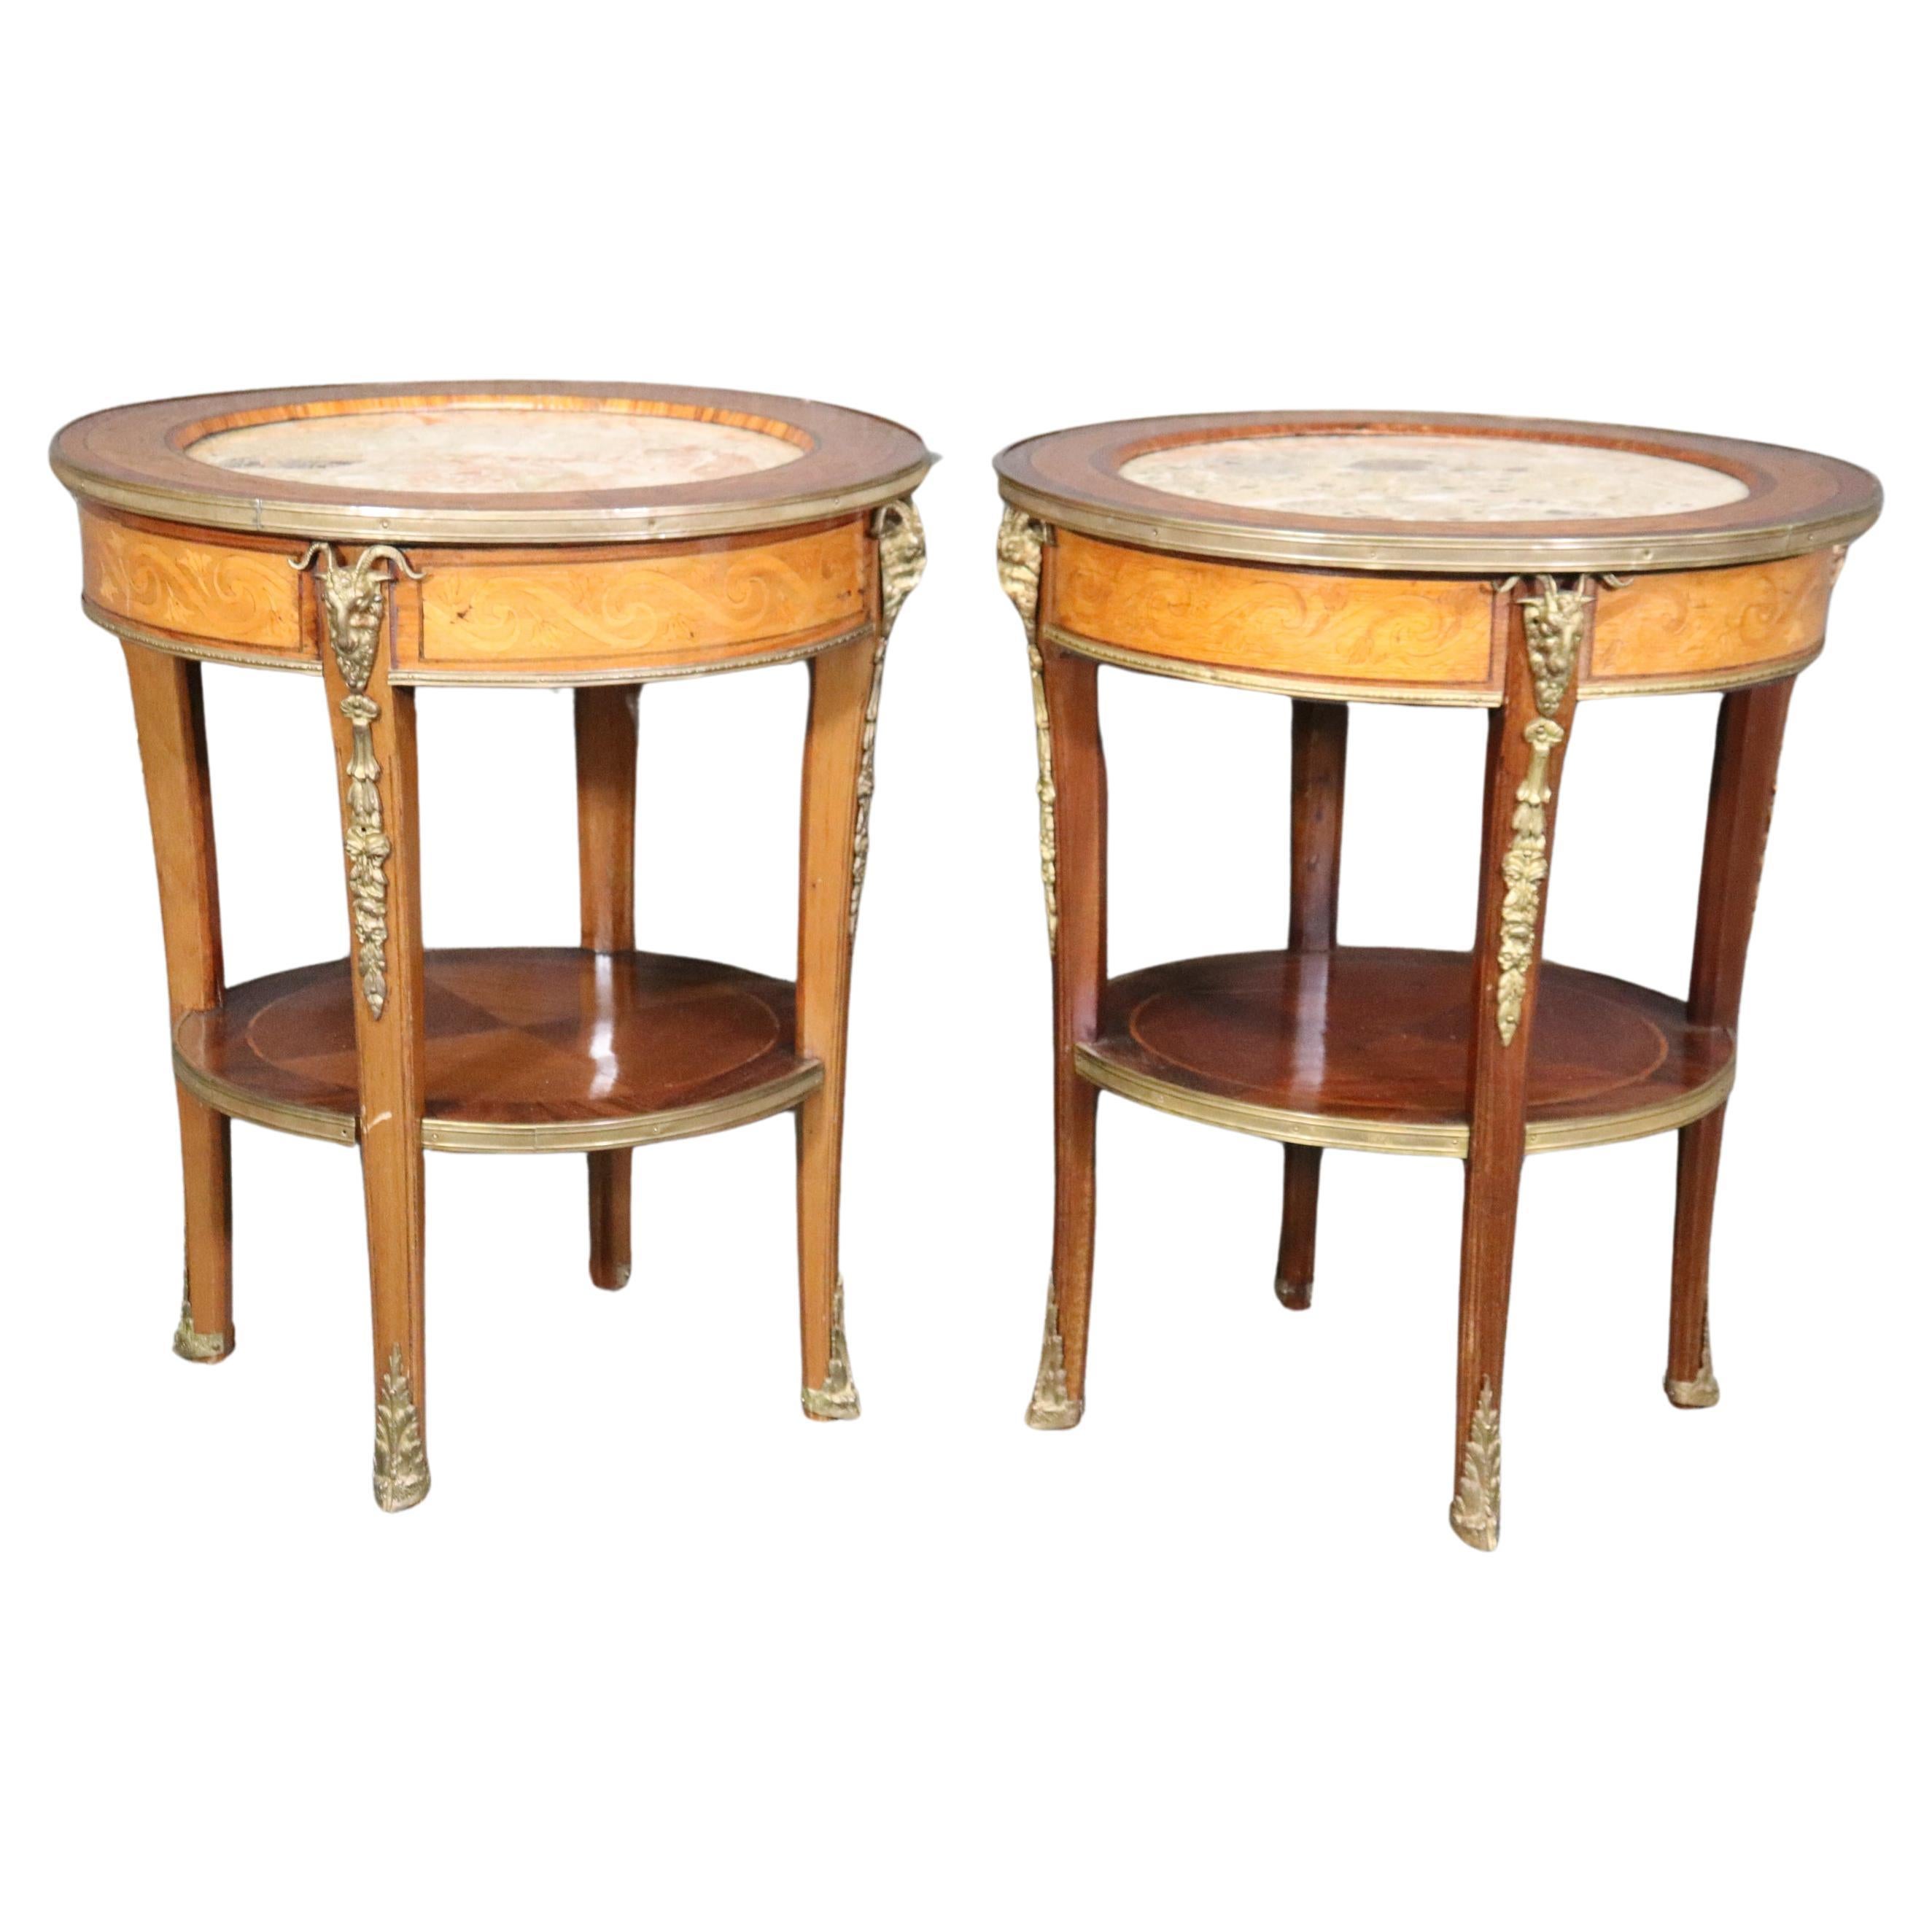 Superb Inlaid Satinwood and Walnut Marble Top Bronze Rams Head End Tables 